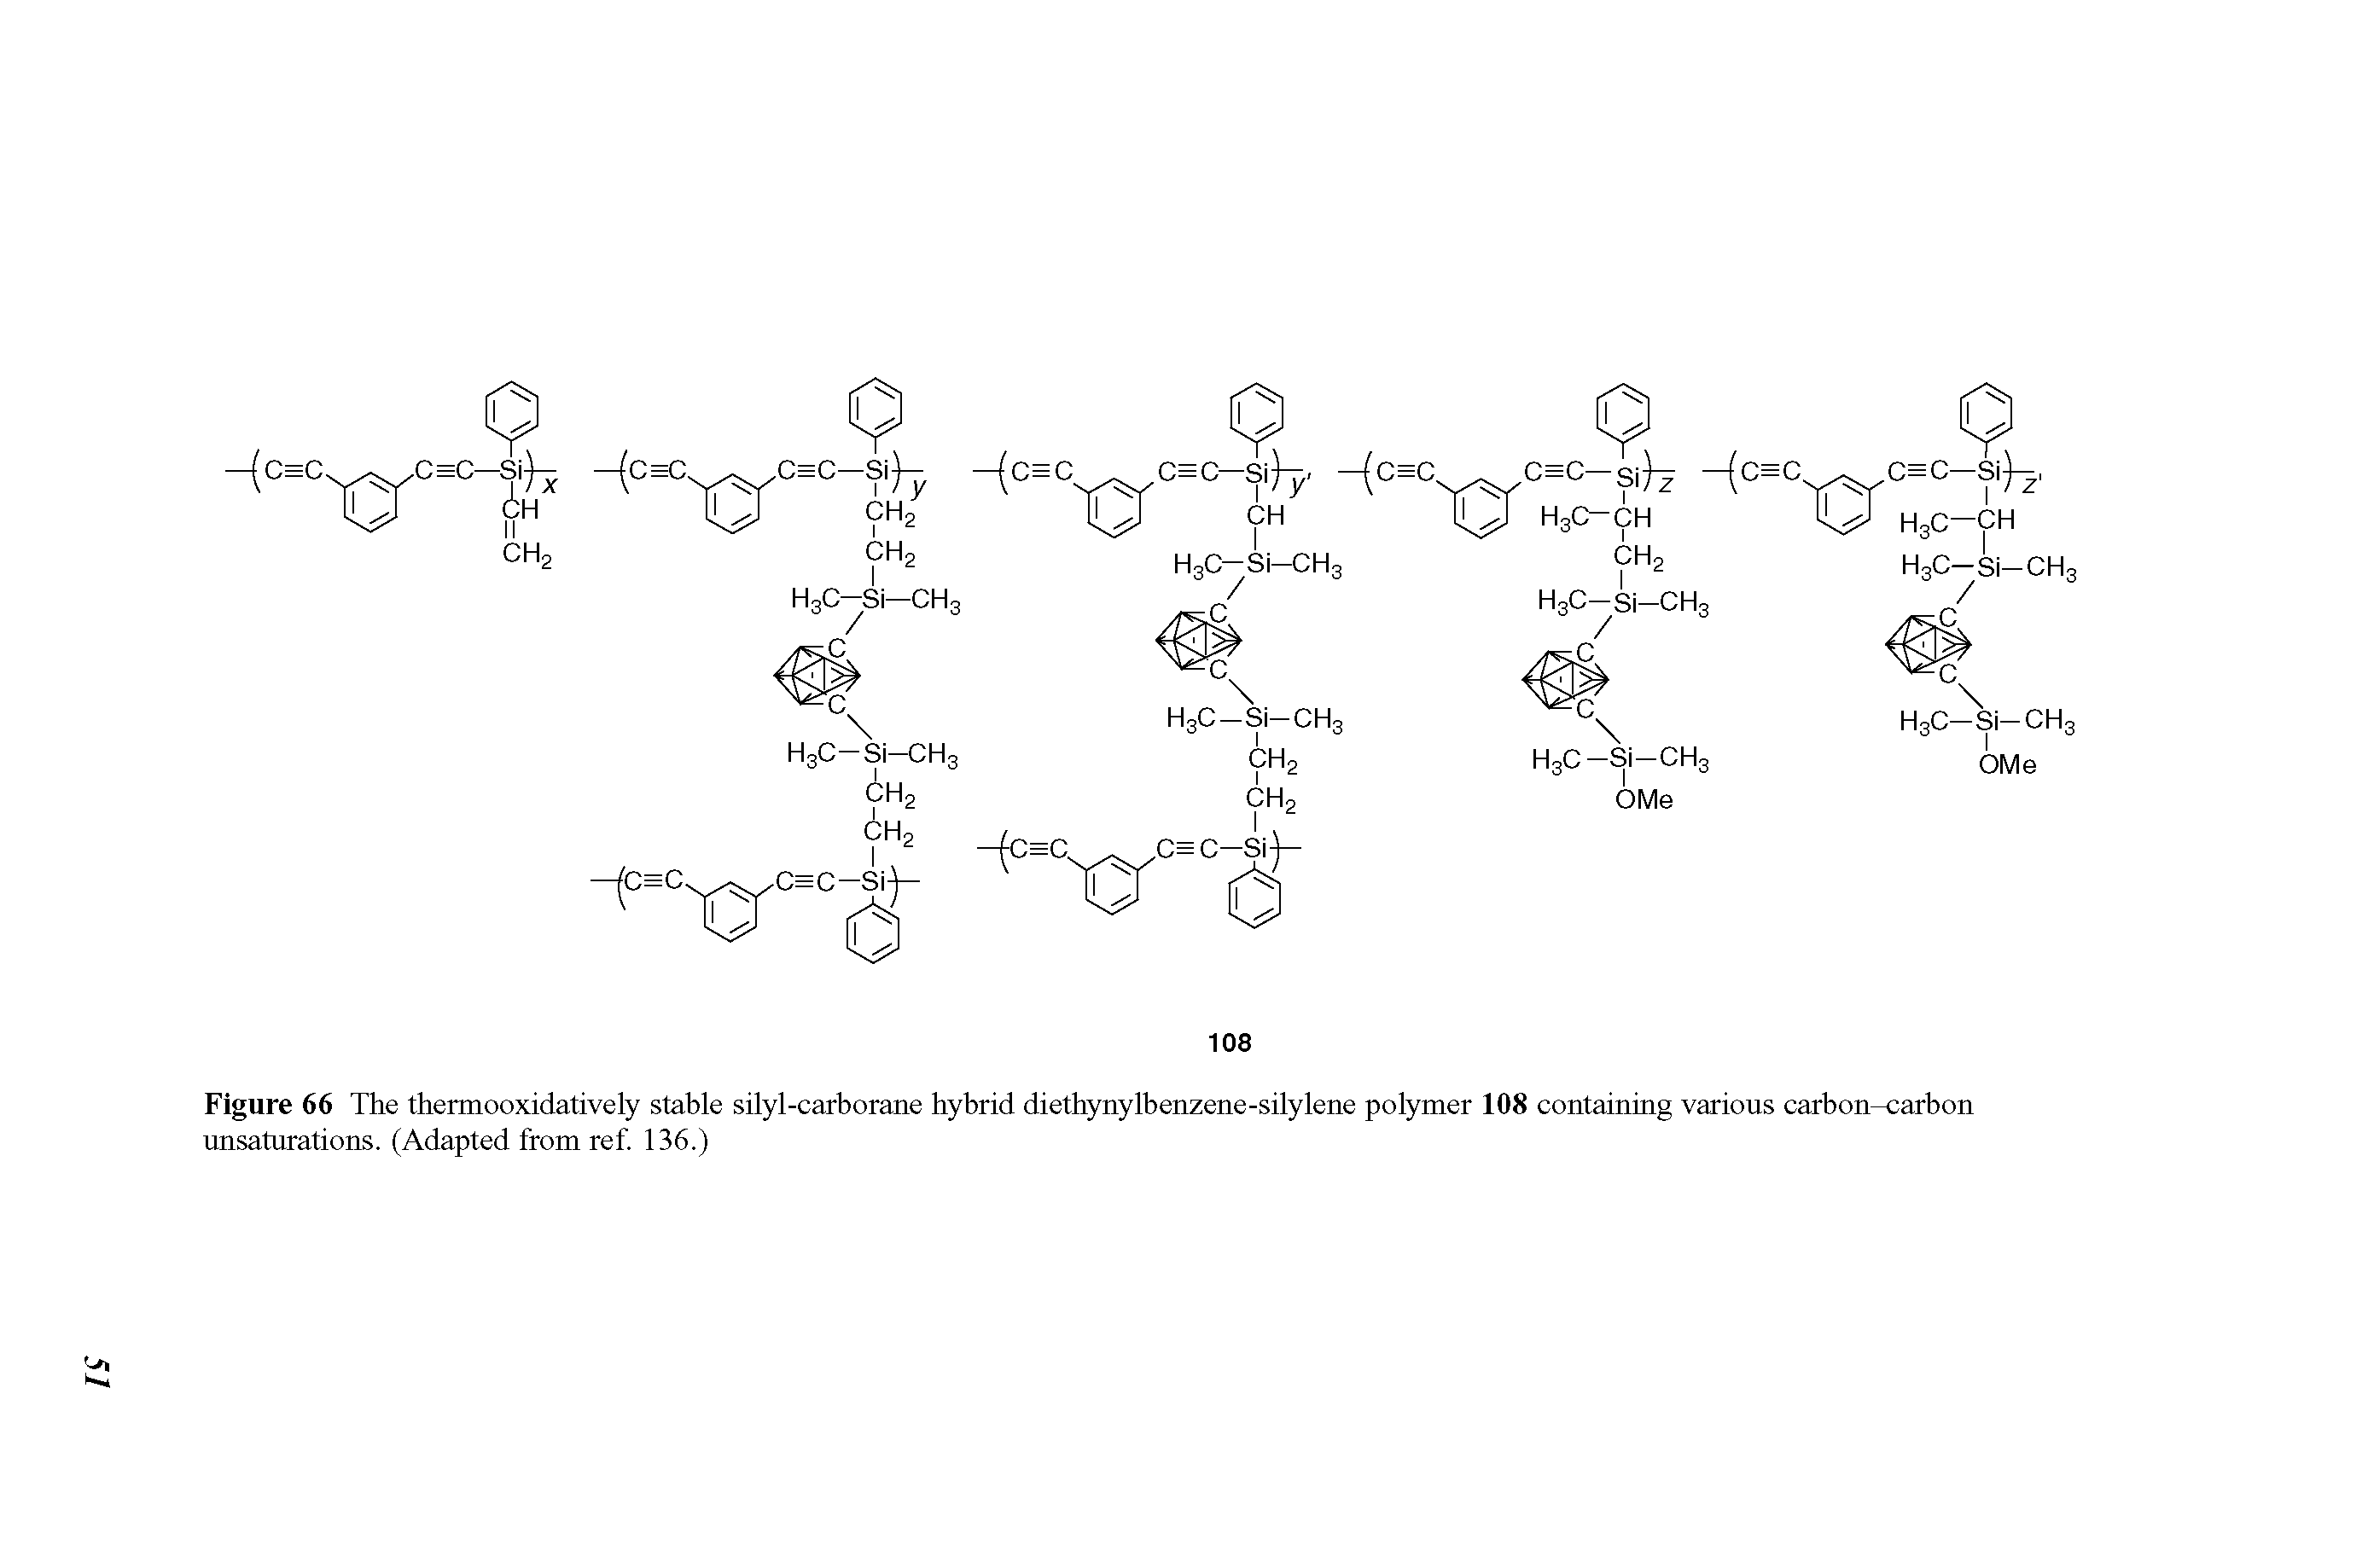 Figure 66 The thermooxidatively stable silyl-carborane hybrid diethynylbenzene-silylene polymer 108 containing various carbon-carbon unsaturations. (Adapted from ref. 136.)...